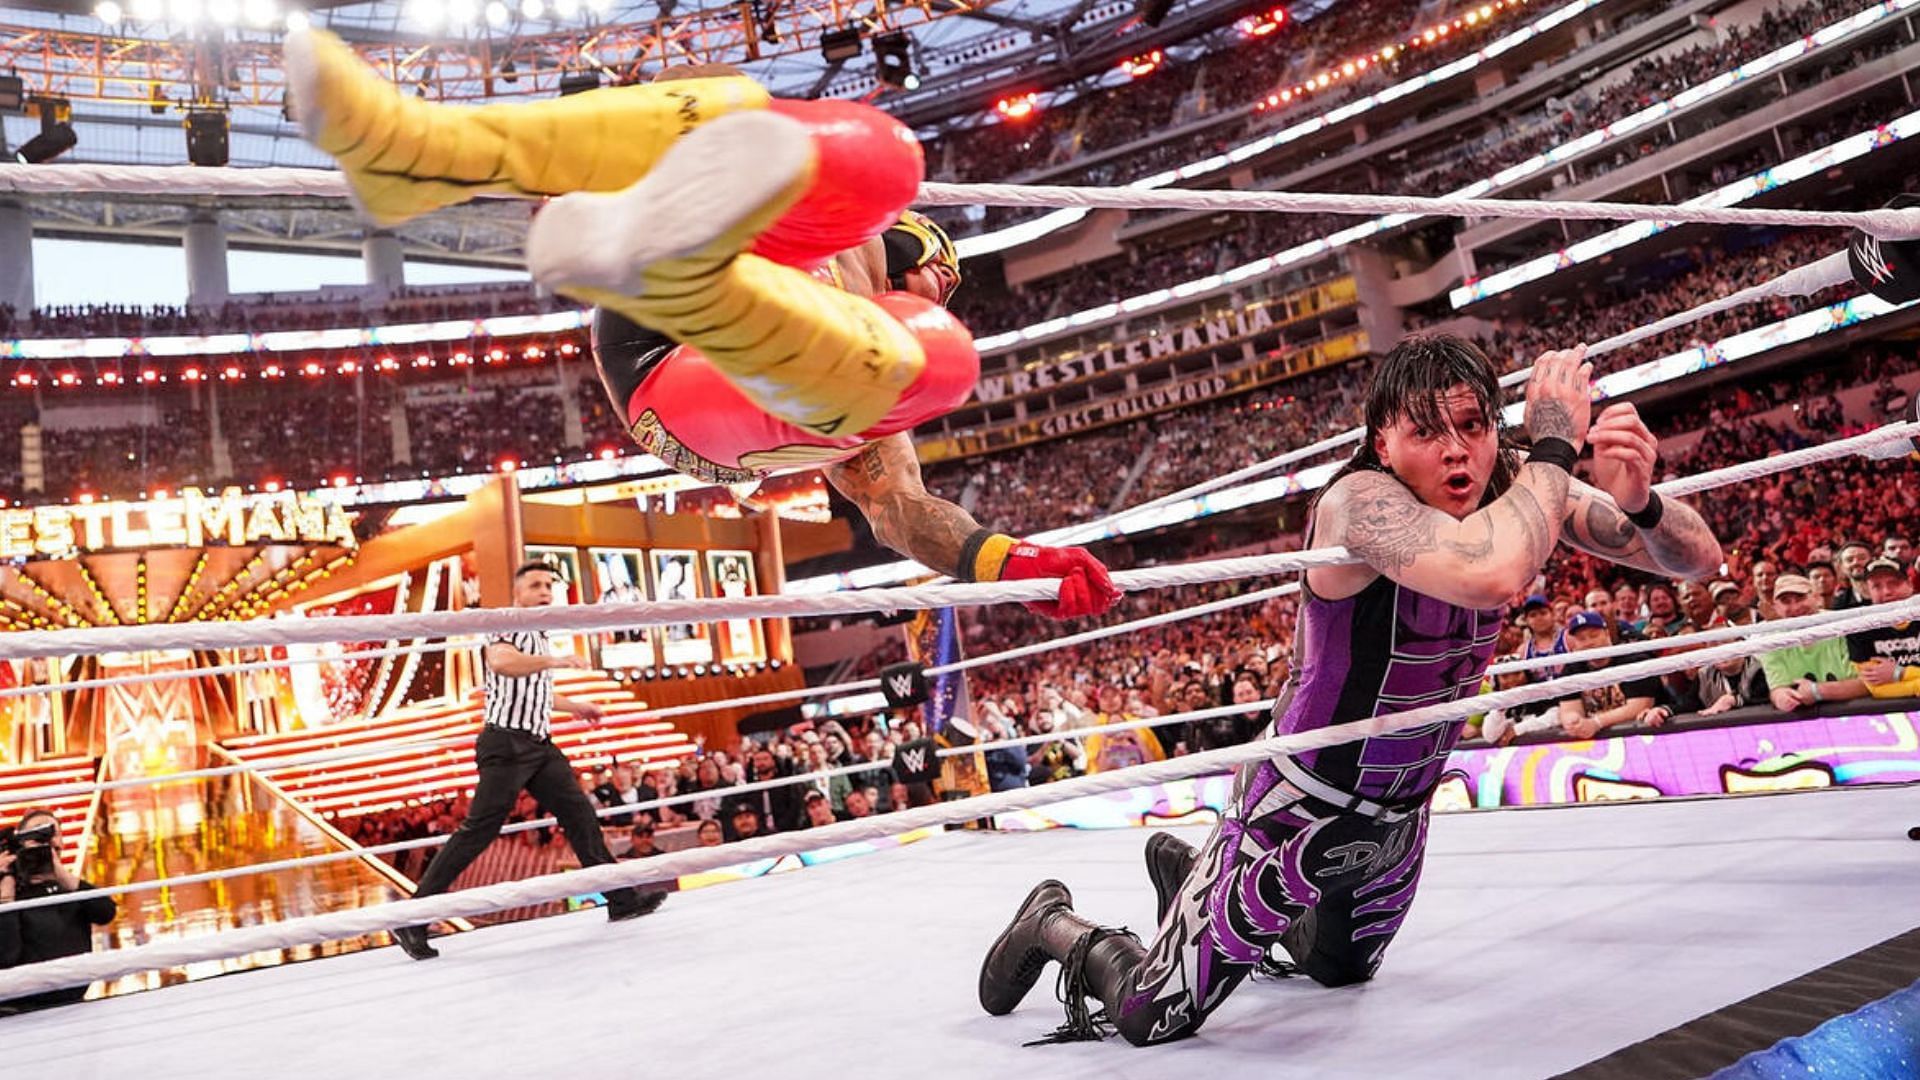 Dominik came up short at WrestleMania 39 against Rey